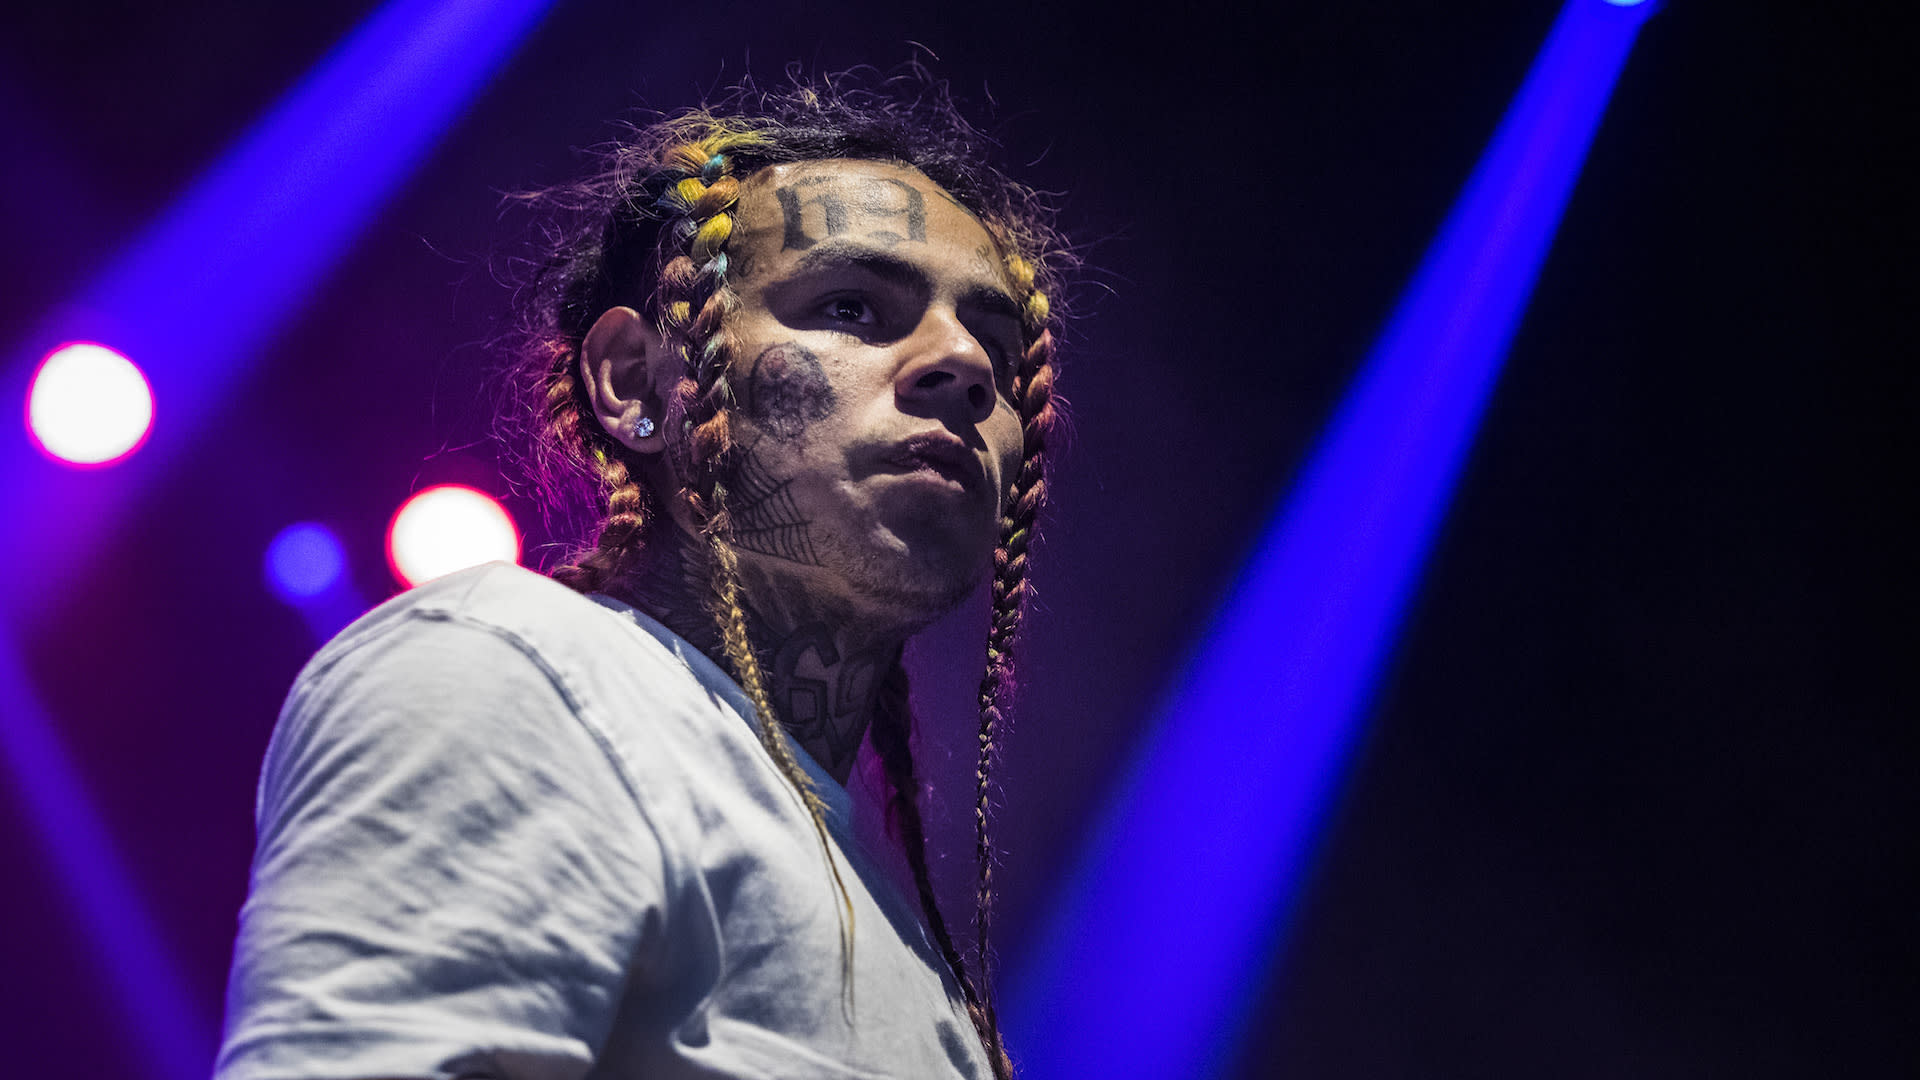 The director of 6ix9ine Docuseries says the rapper is “truly a horrible human being”